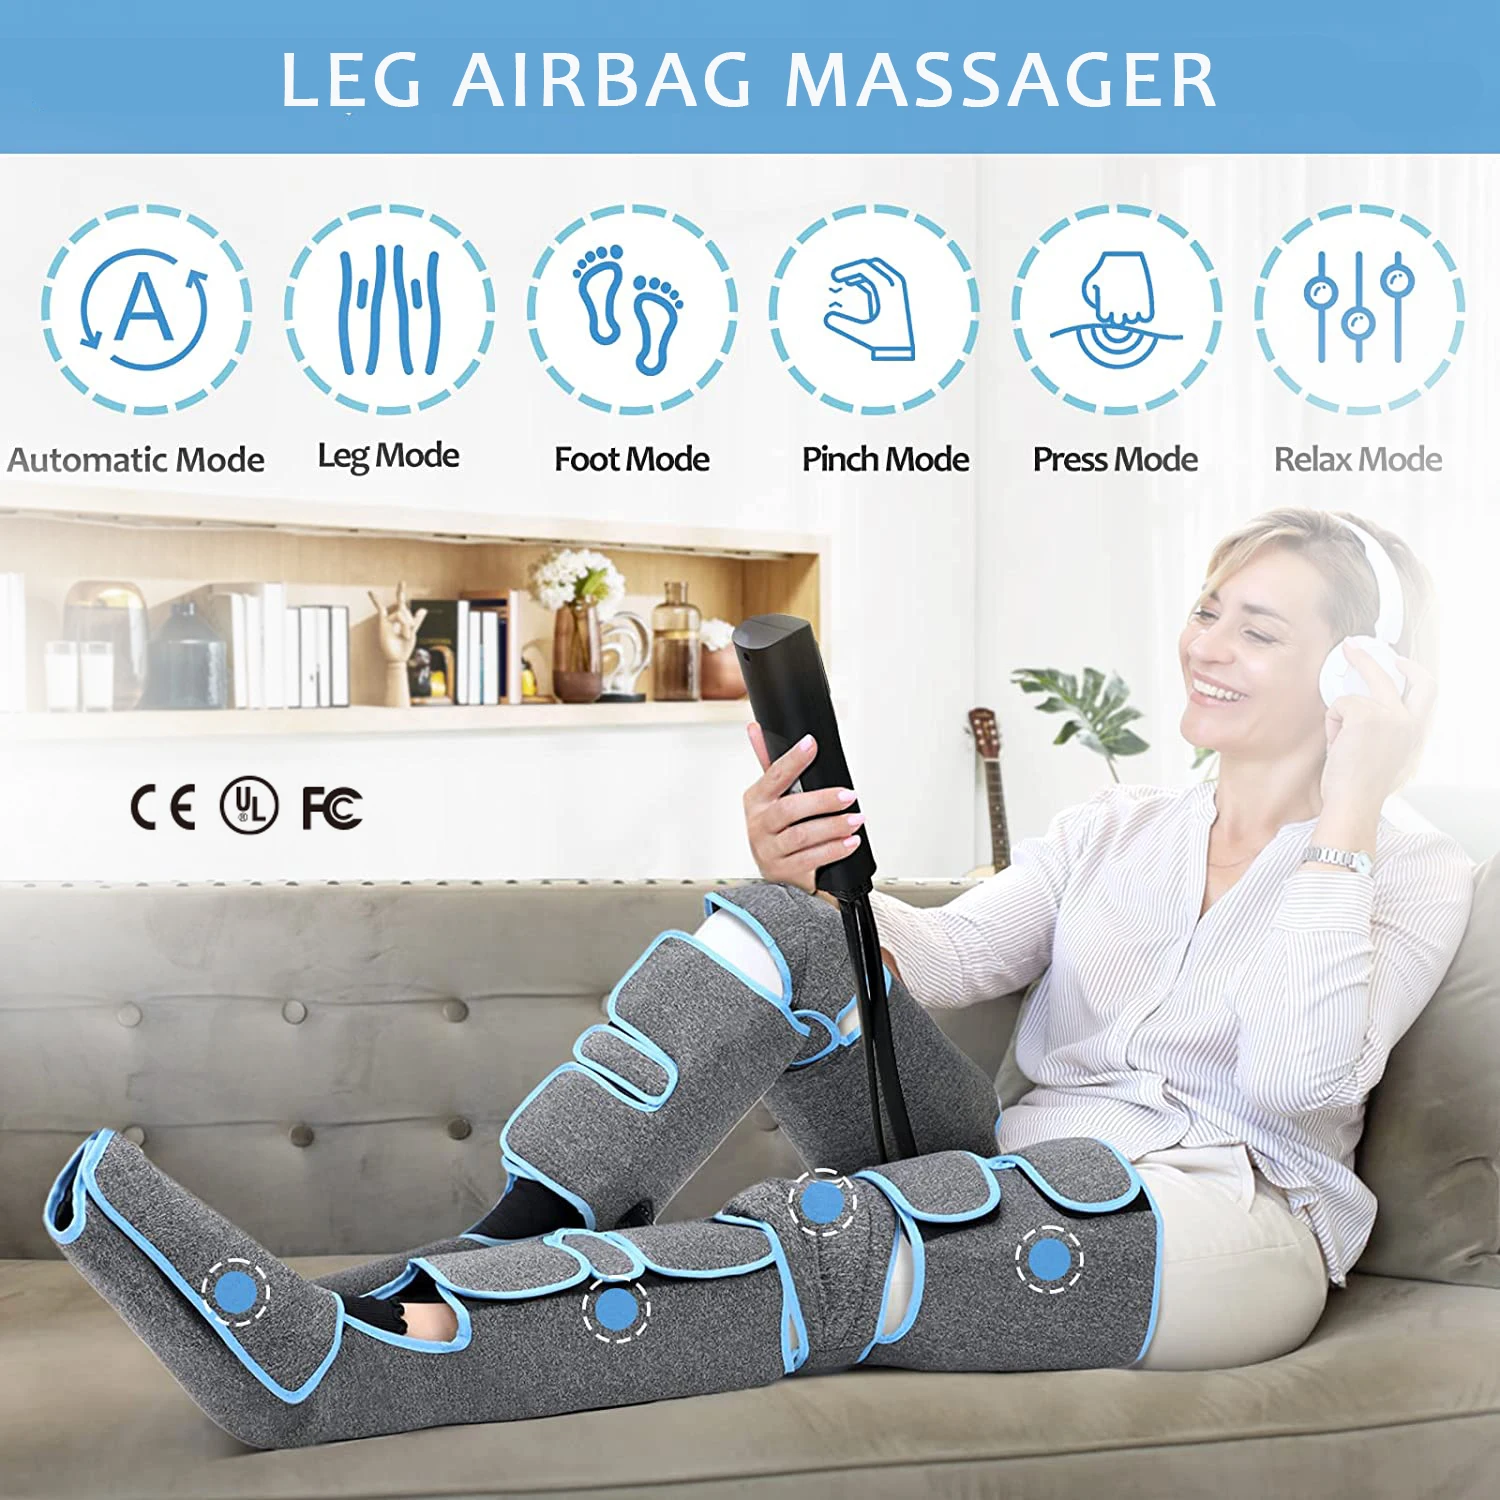 

New 360° Foot air pressure leg massager promotes blood circulation, body massager, muscle relaxation, lymphatic drainage device